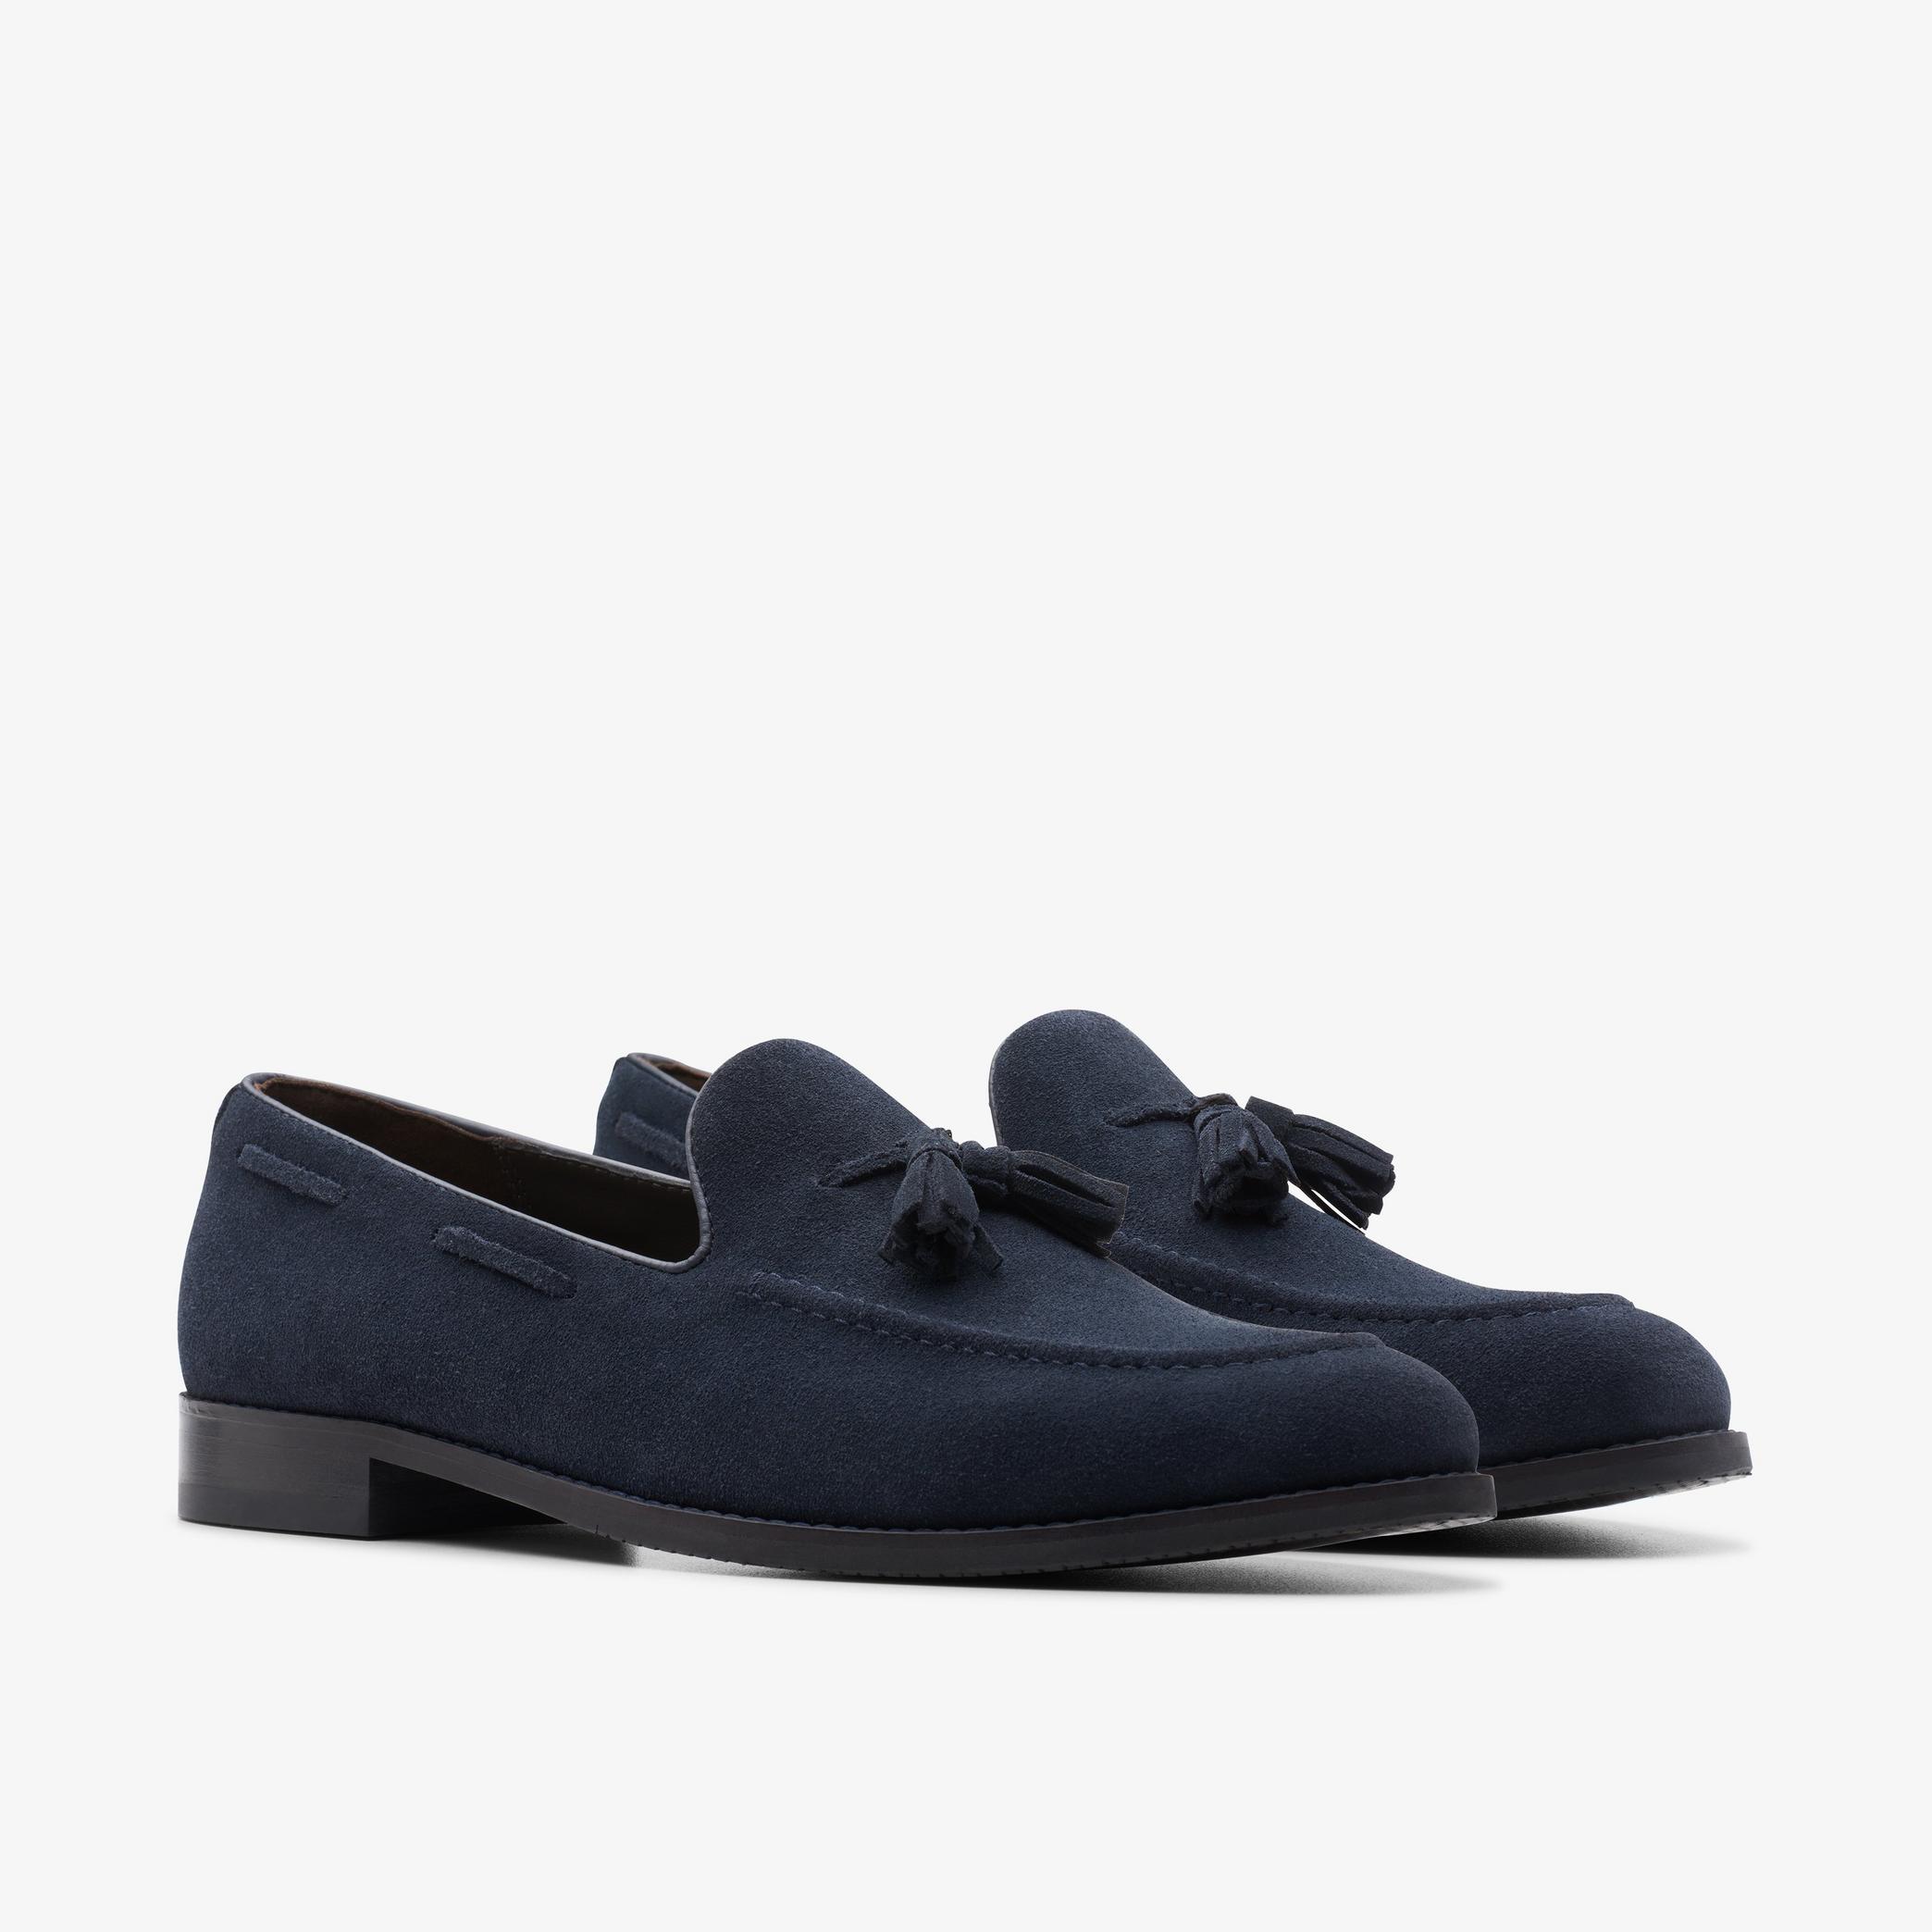 Craft Arlo Trim Navy Suede Shoes, view 4 of 7